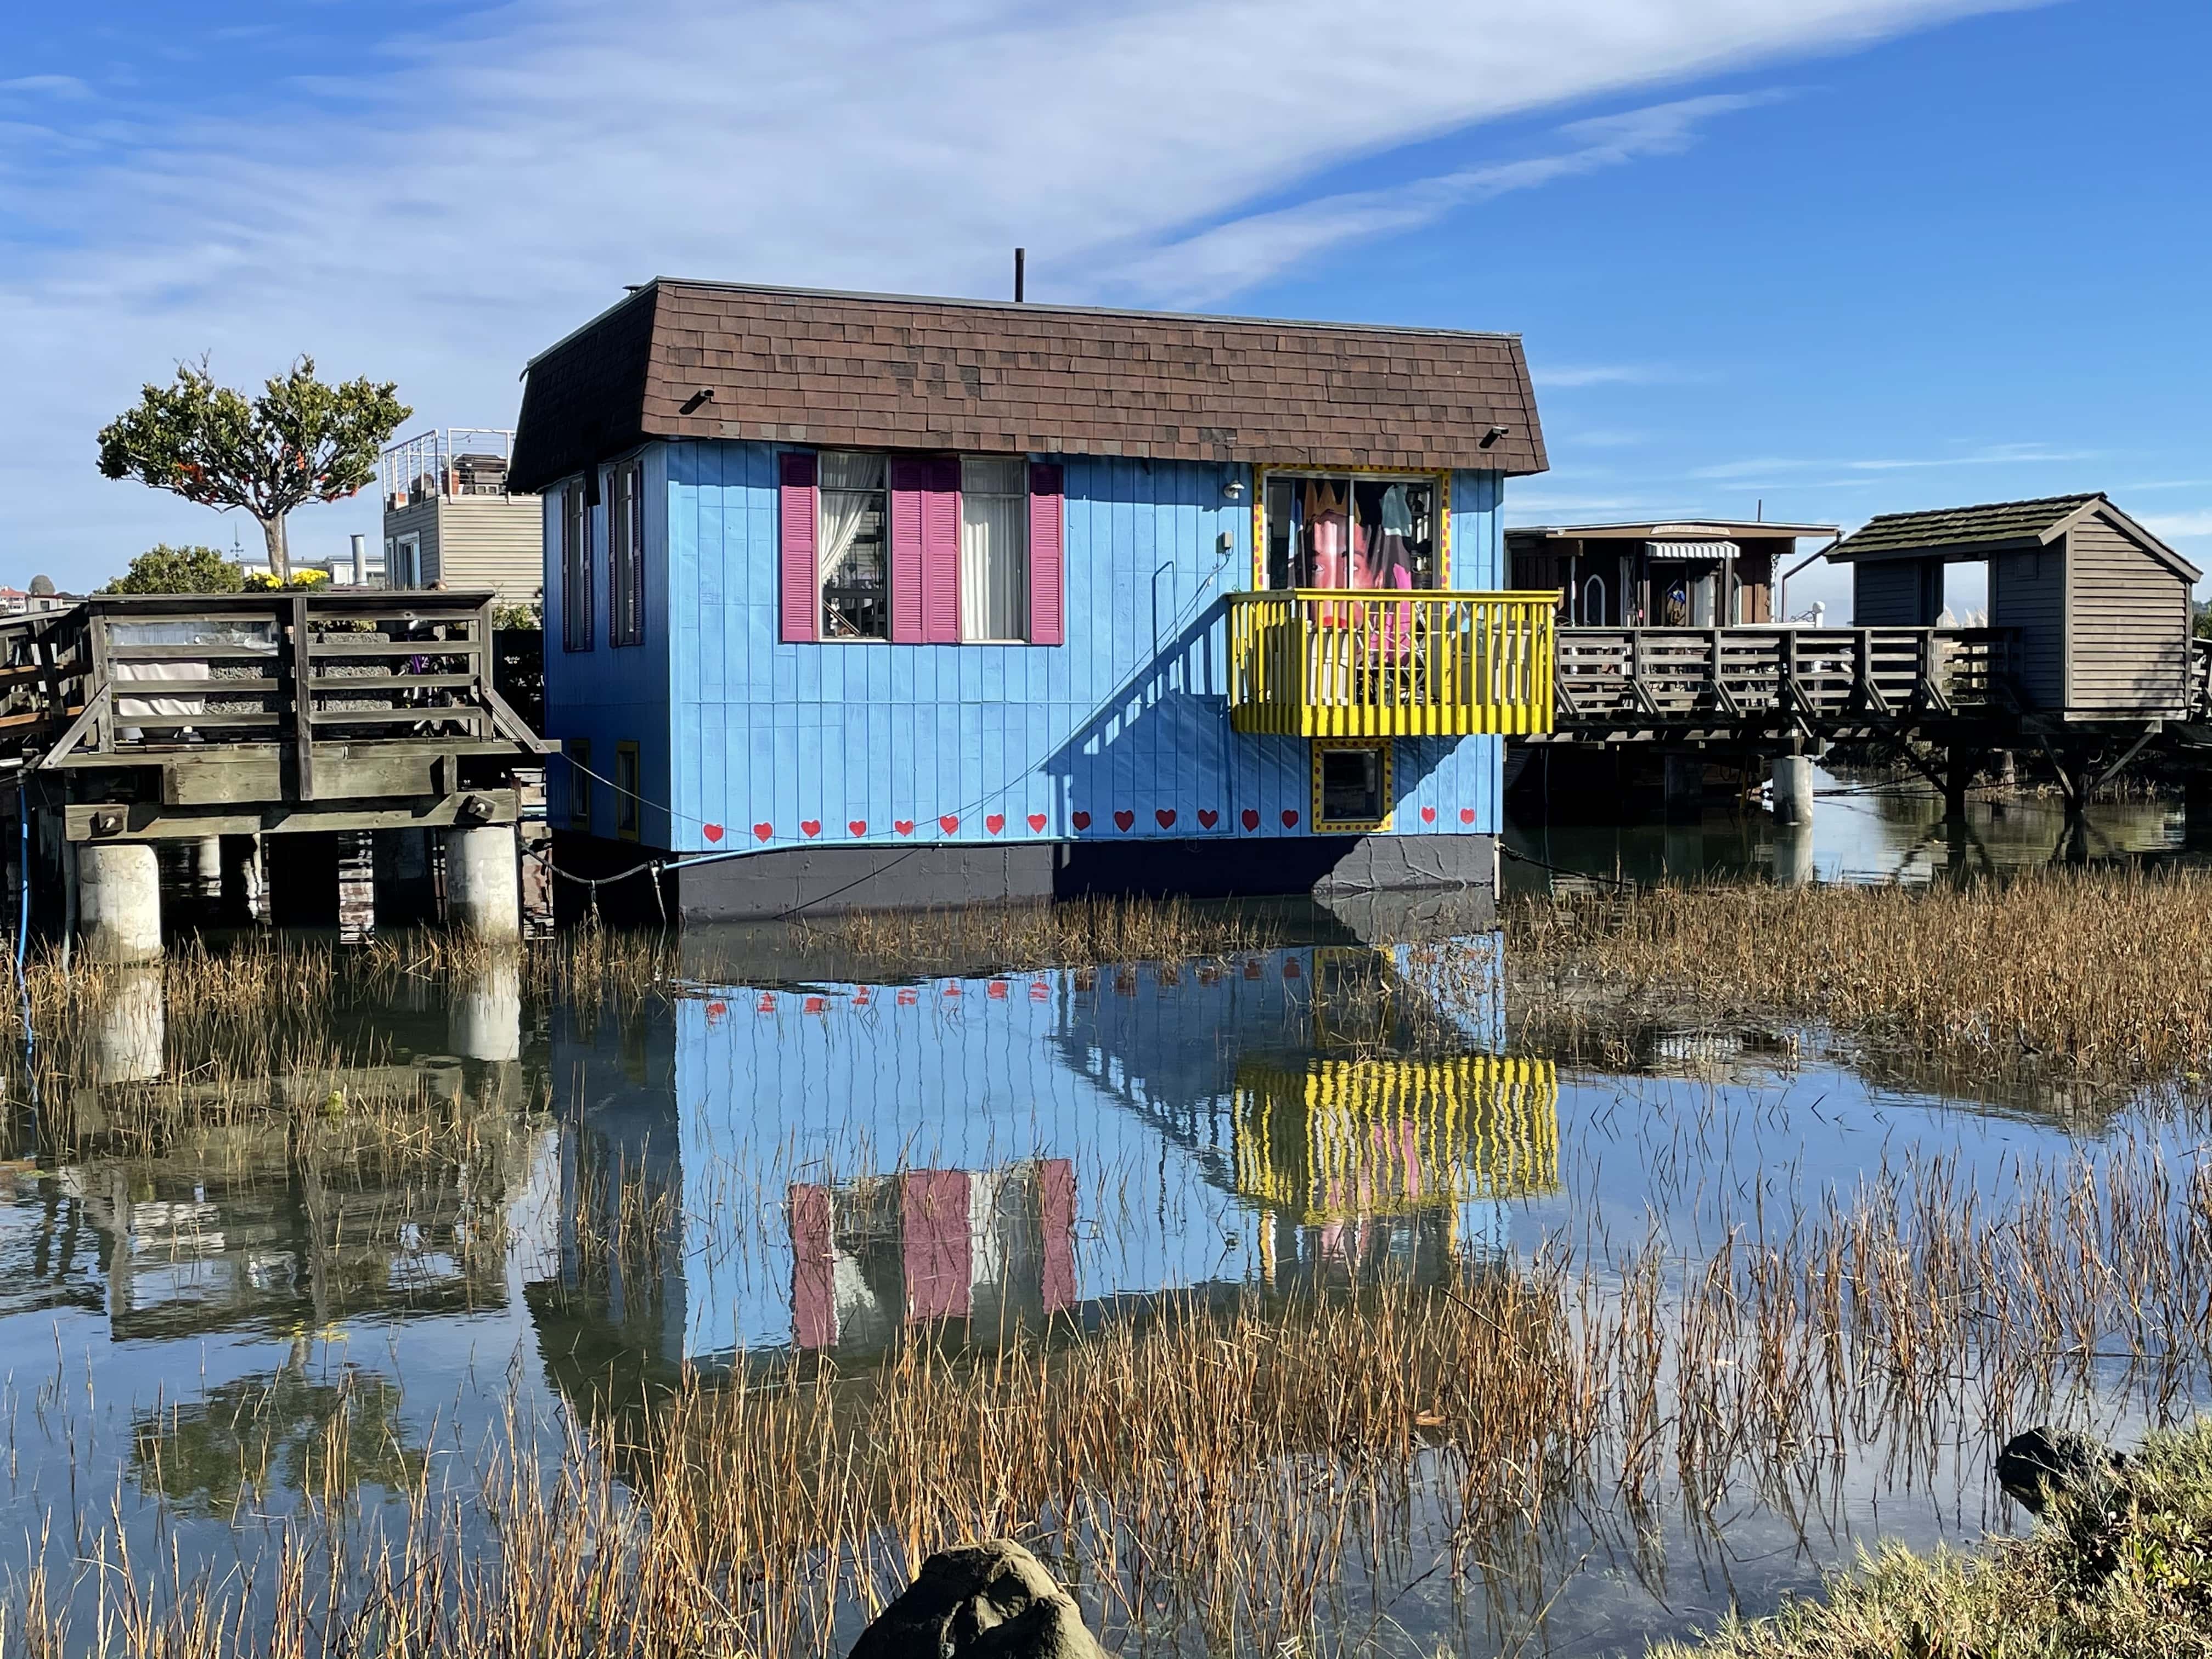 iPhone 12 mini sample photo: The colors and details of this houseboat look true to life.